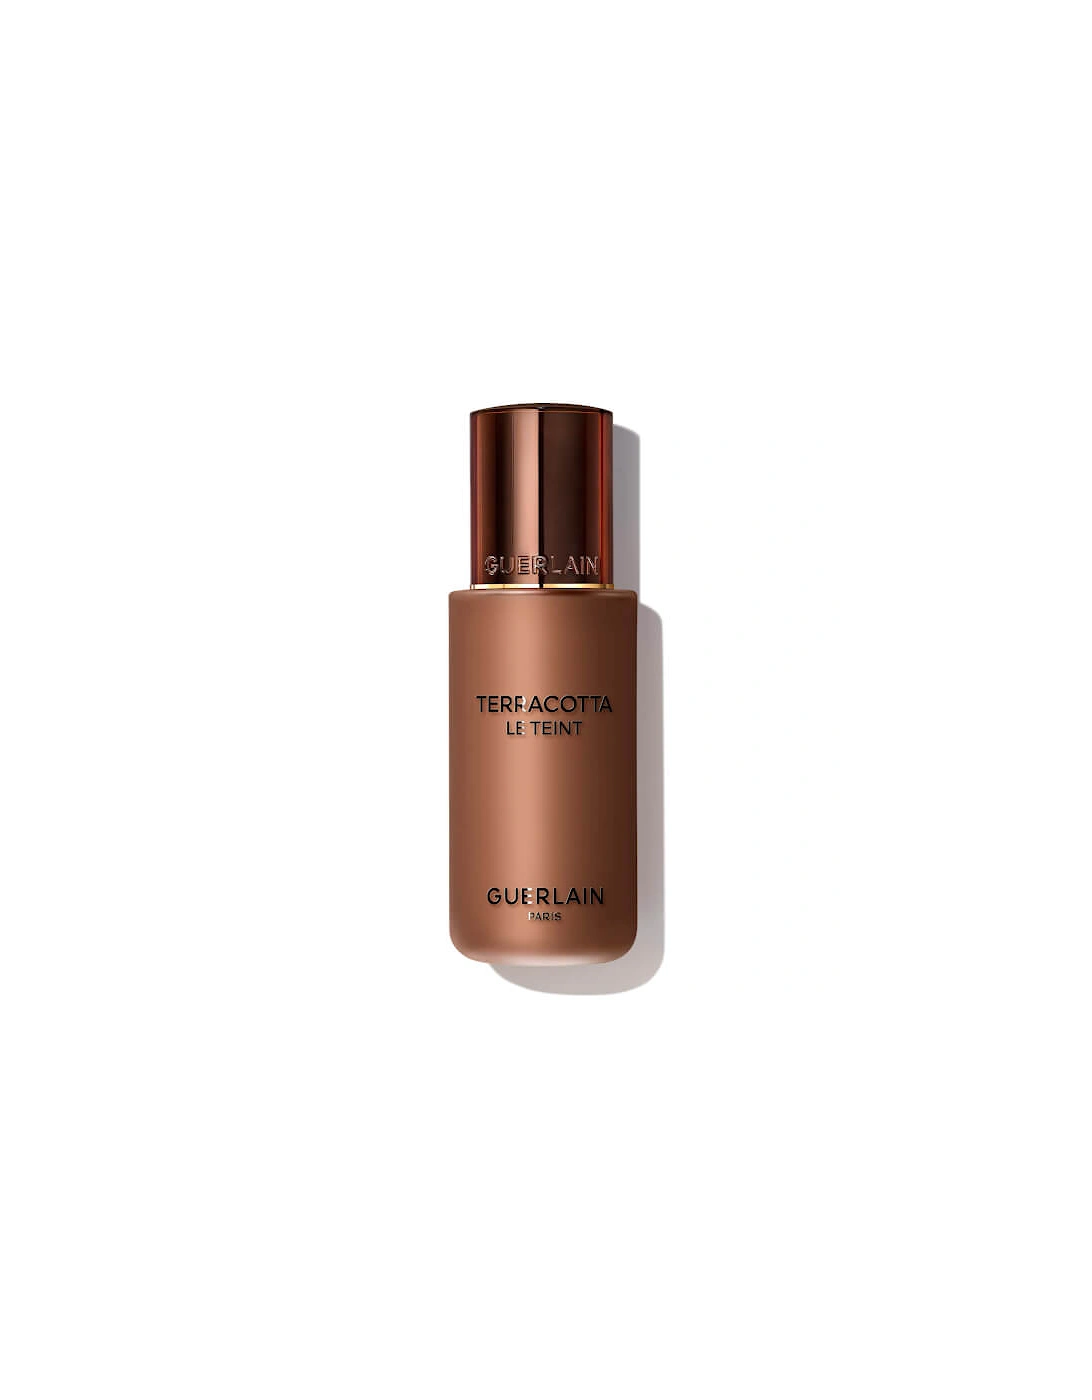 Terracotta Le Teint Healthy Glow Natural Perfection Foundation - 7N, 2 of 1